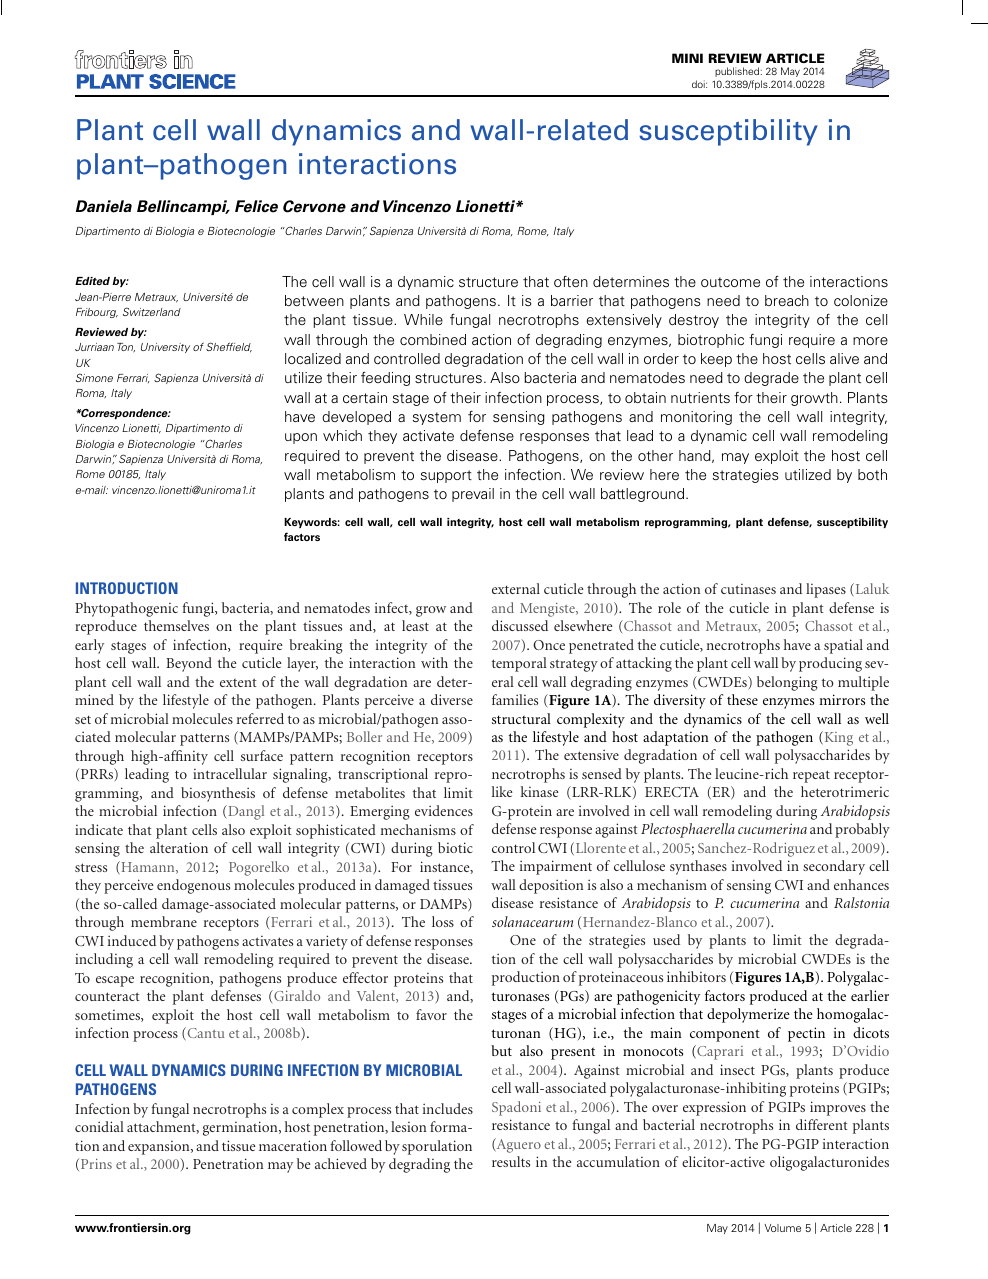 Plant Cell Wall Dynamics And Wall Related Susceptibility In Planta Pathogen Interactions Topic Of Research Paper In Biological Sciences Download Scholarly Article Pdf And Read For Free On Cyberleninka Open Science Hub